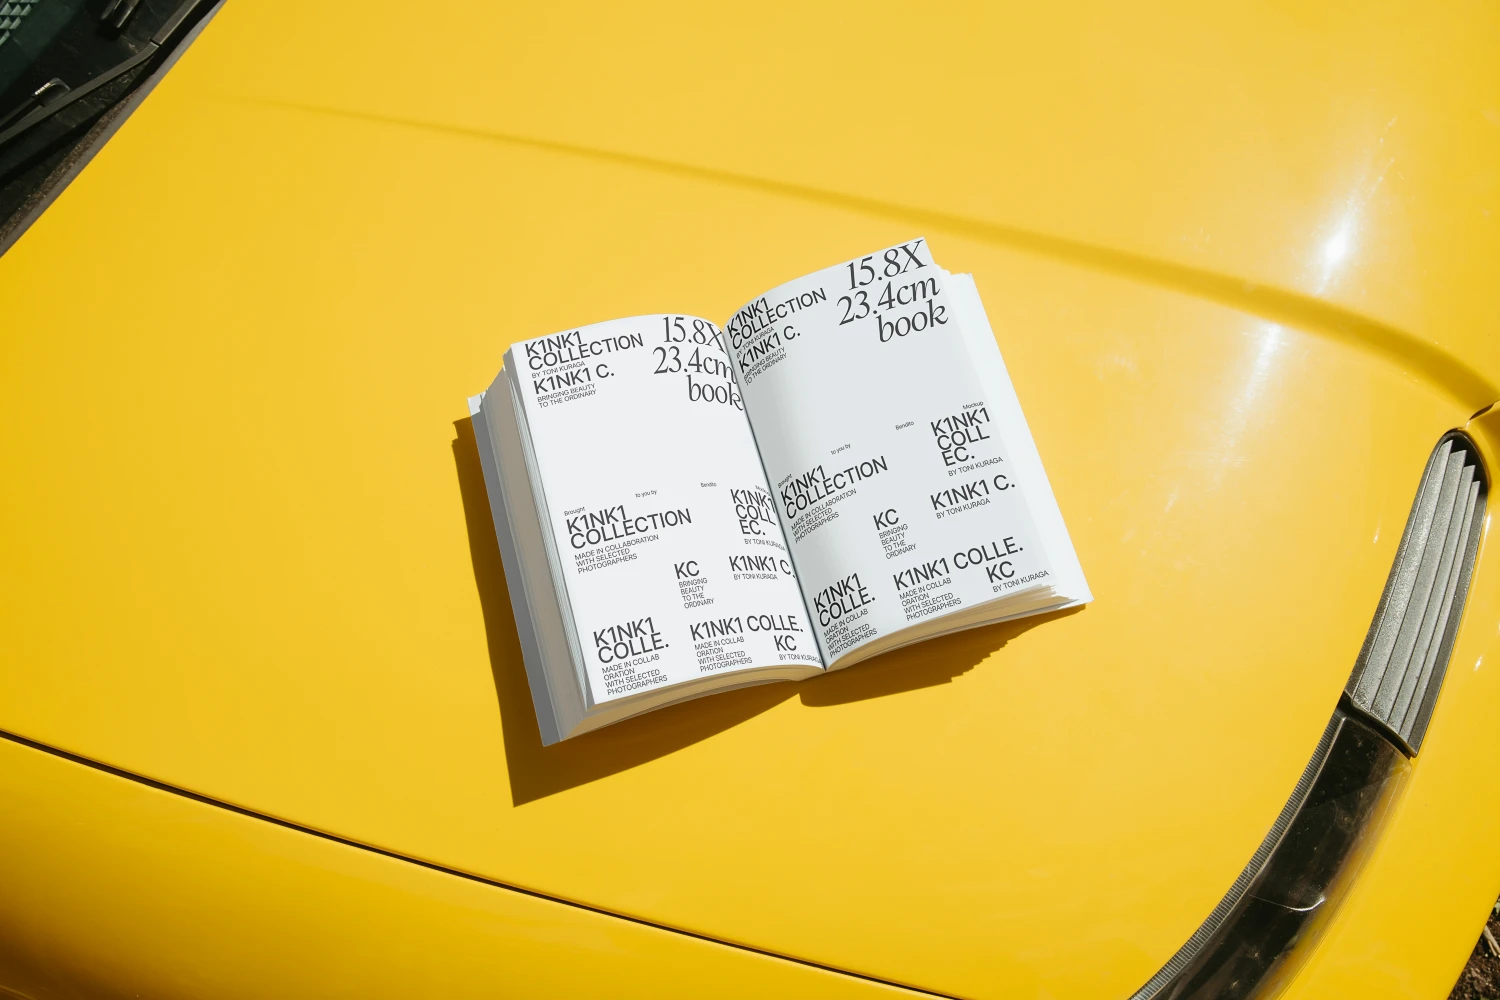 Open book mockup on a yellow car surface.